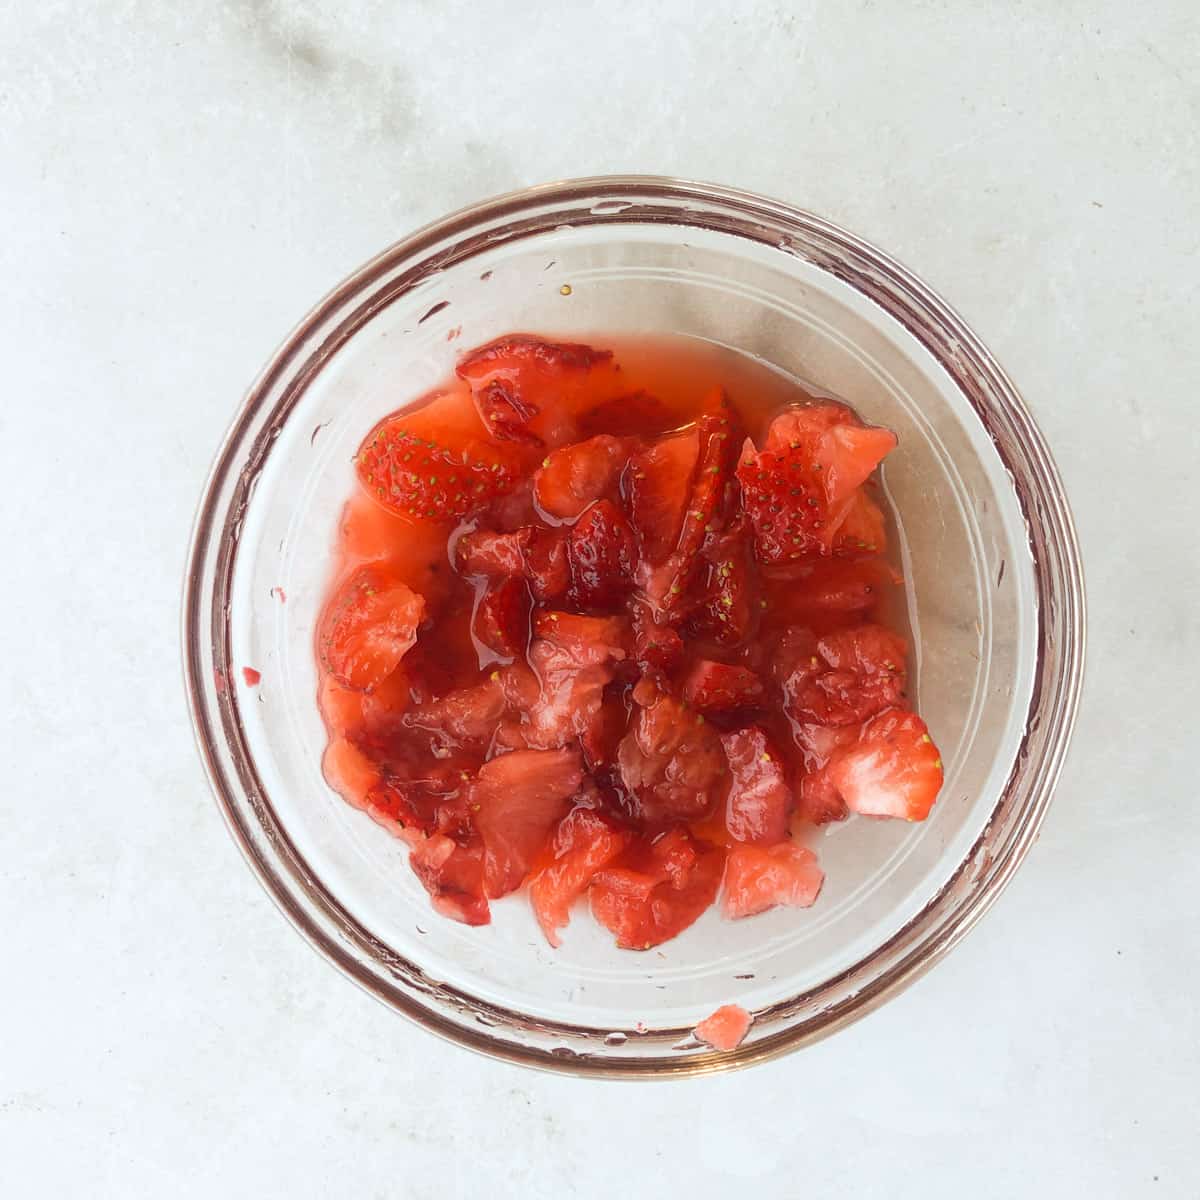 Mashed strawberries in bowl